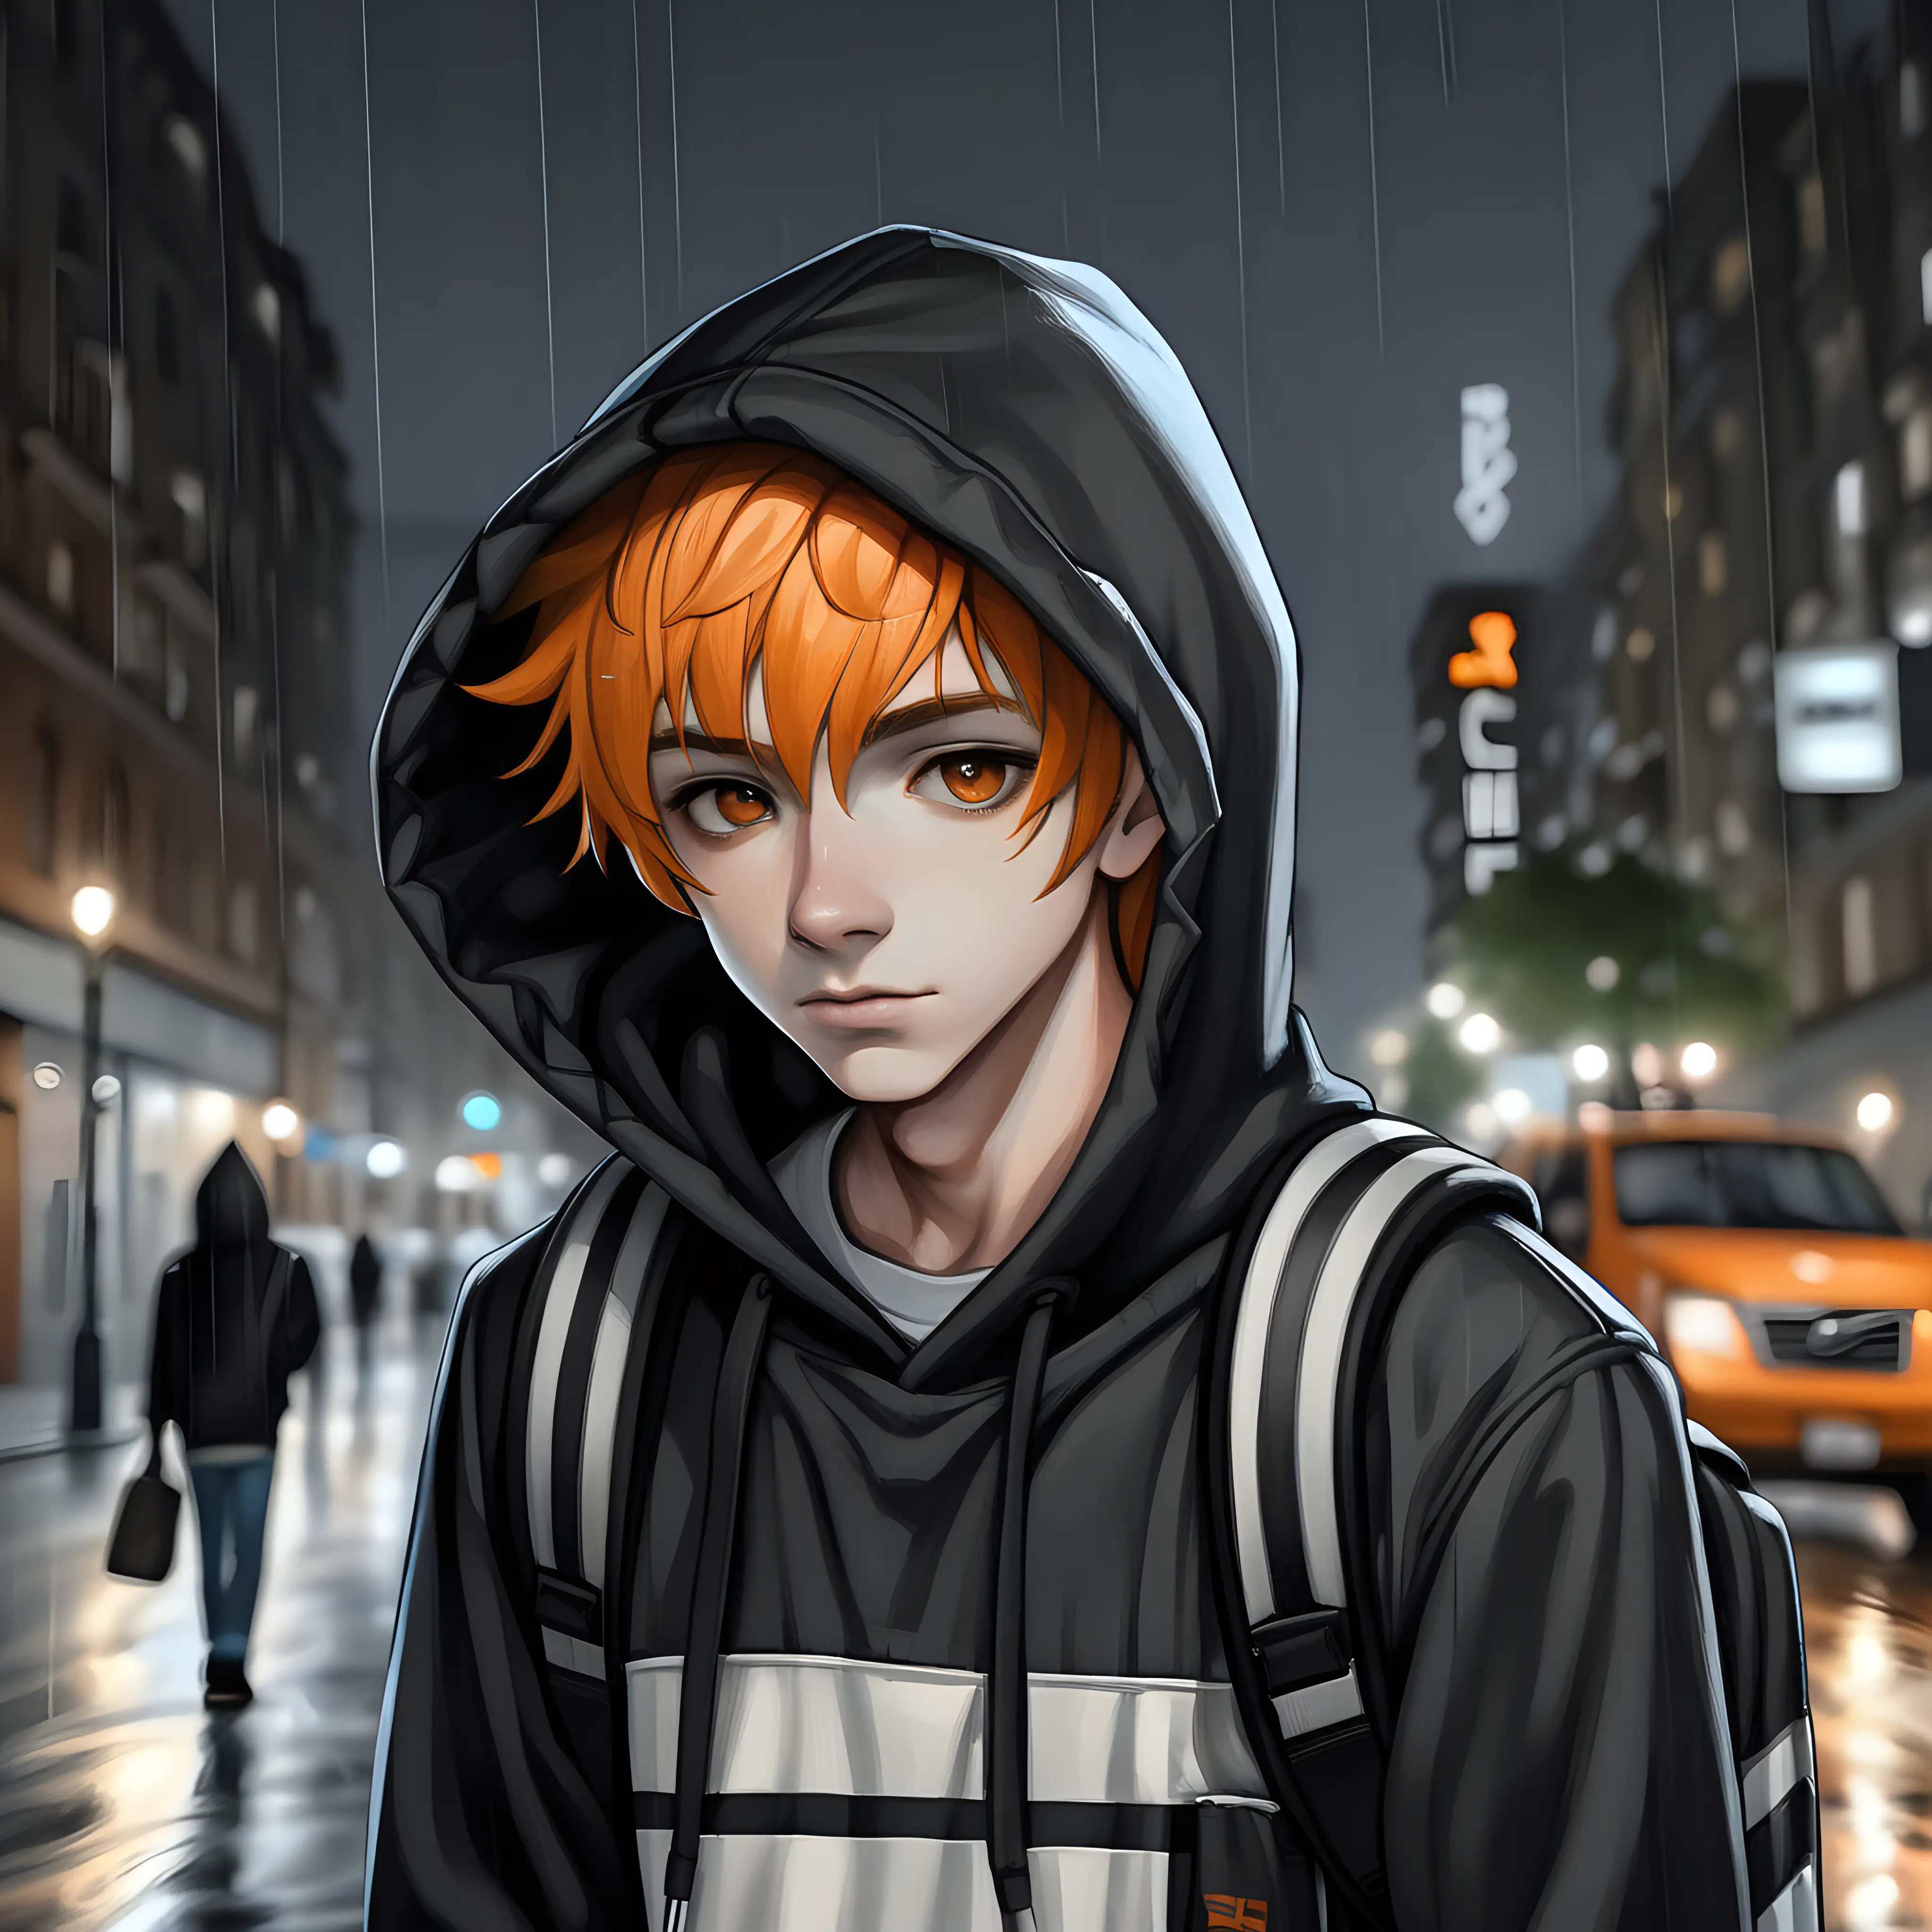 Lonely Teenager Walking in City Rain at Night